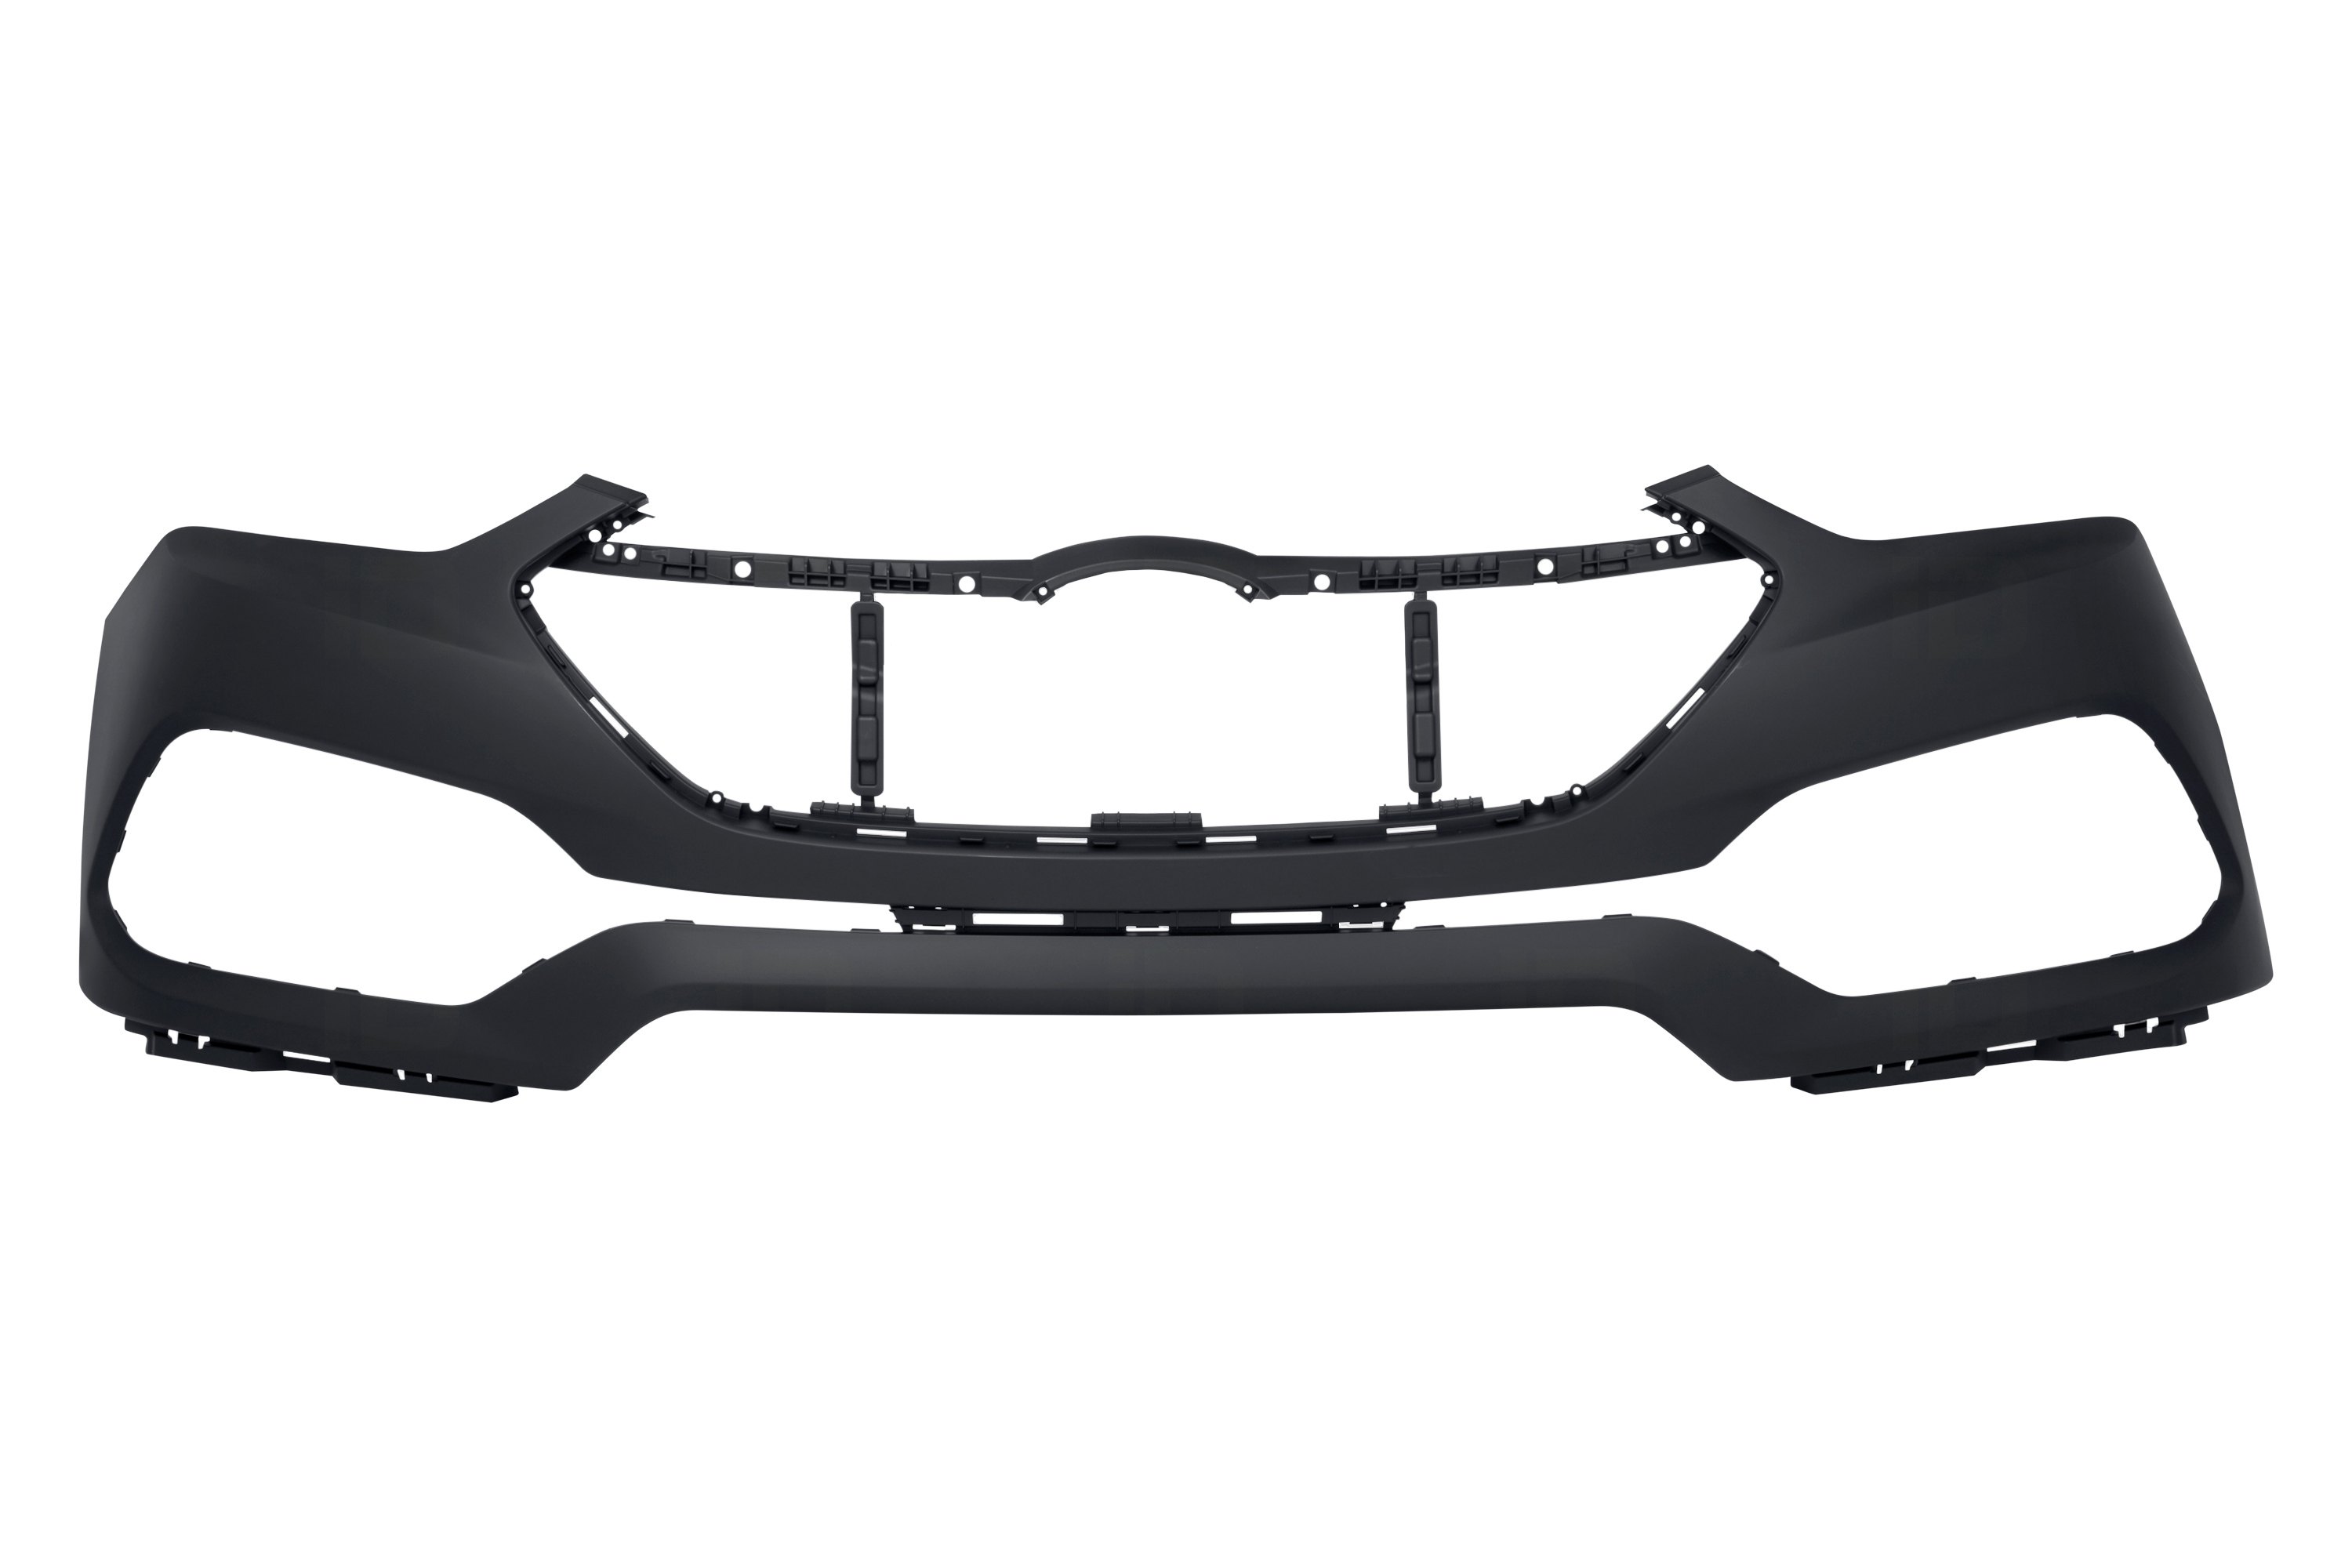 For Hyundai Santa Fe Sport 2017-2018 Replace HY1000217C Front Bumper Cover | eBay Hyundai Santa Fe Front Bumper Replacement Cost